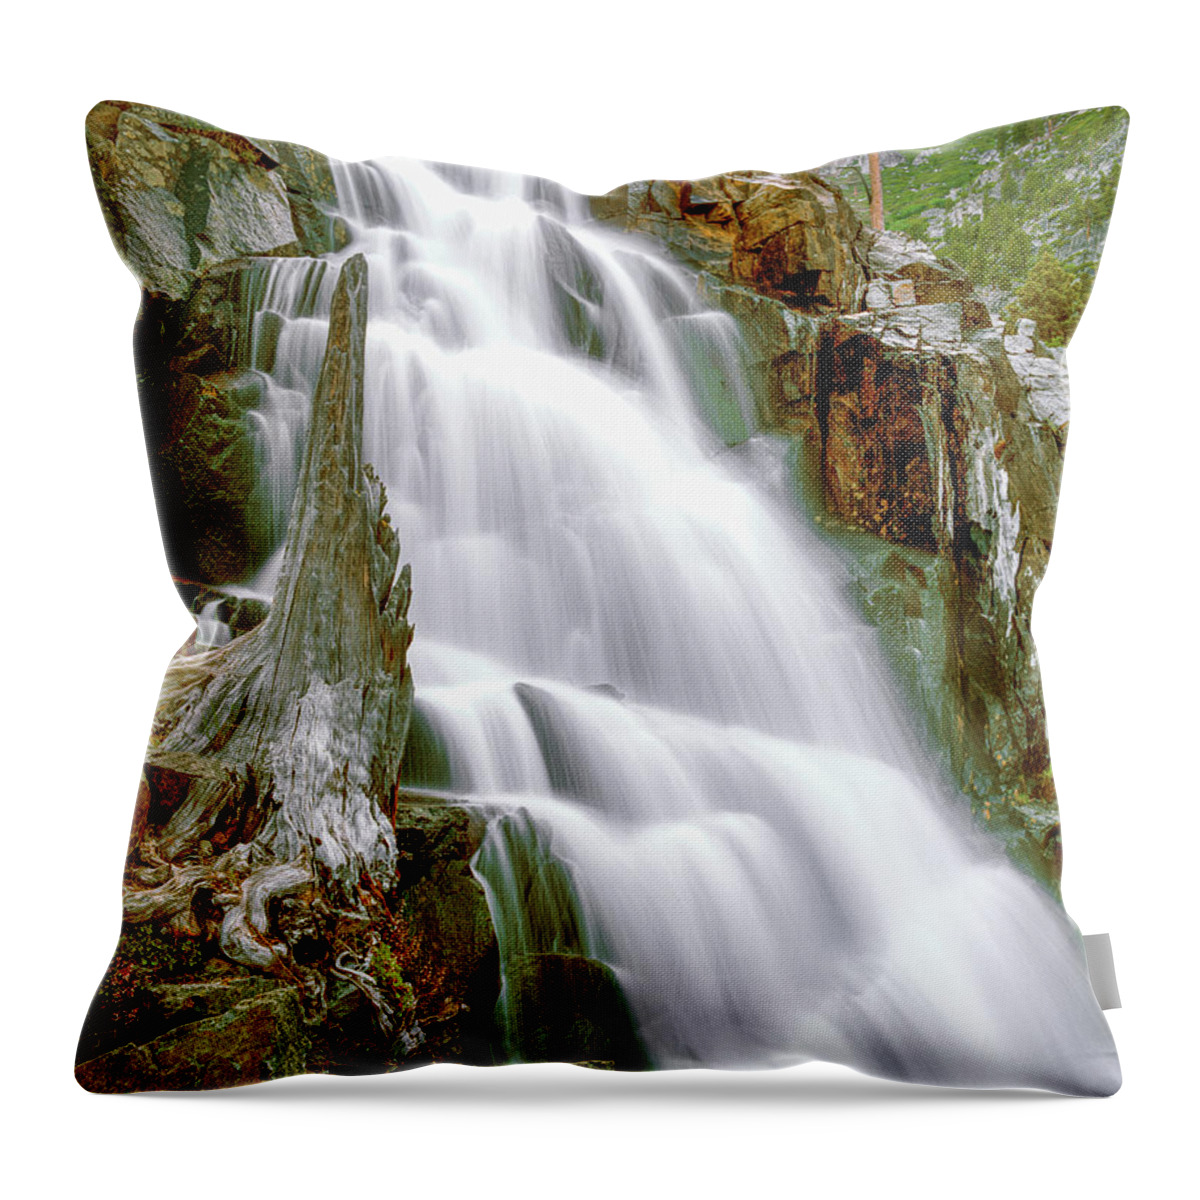 California Throw Pillow featuring the photograph Eagle Falls by Randy Bradley